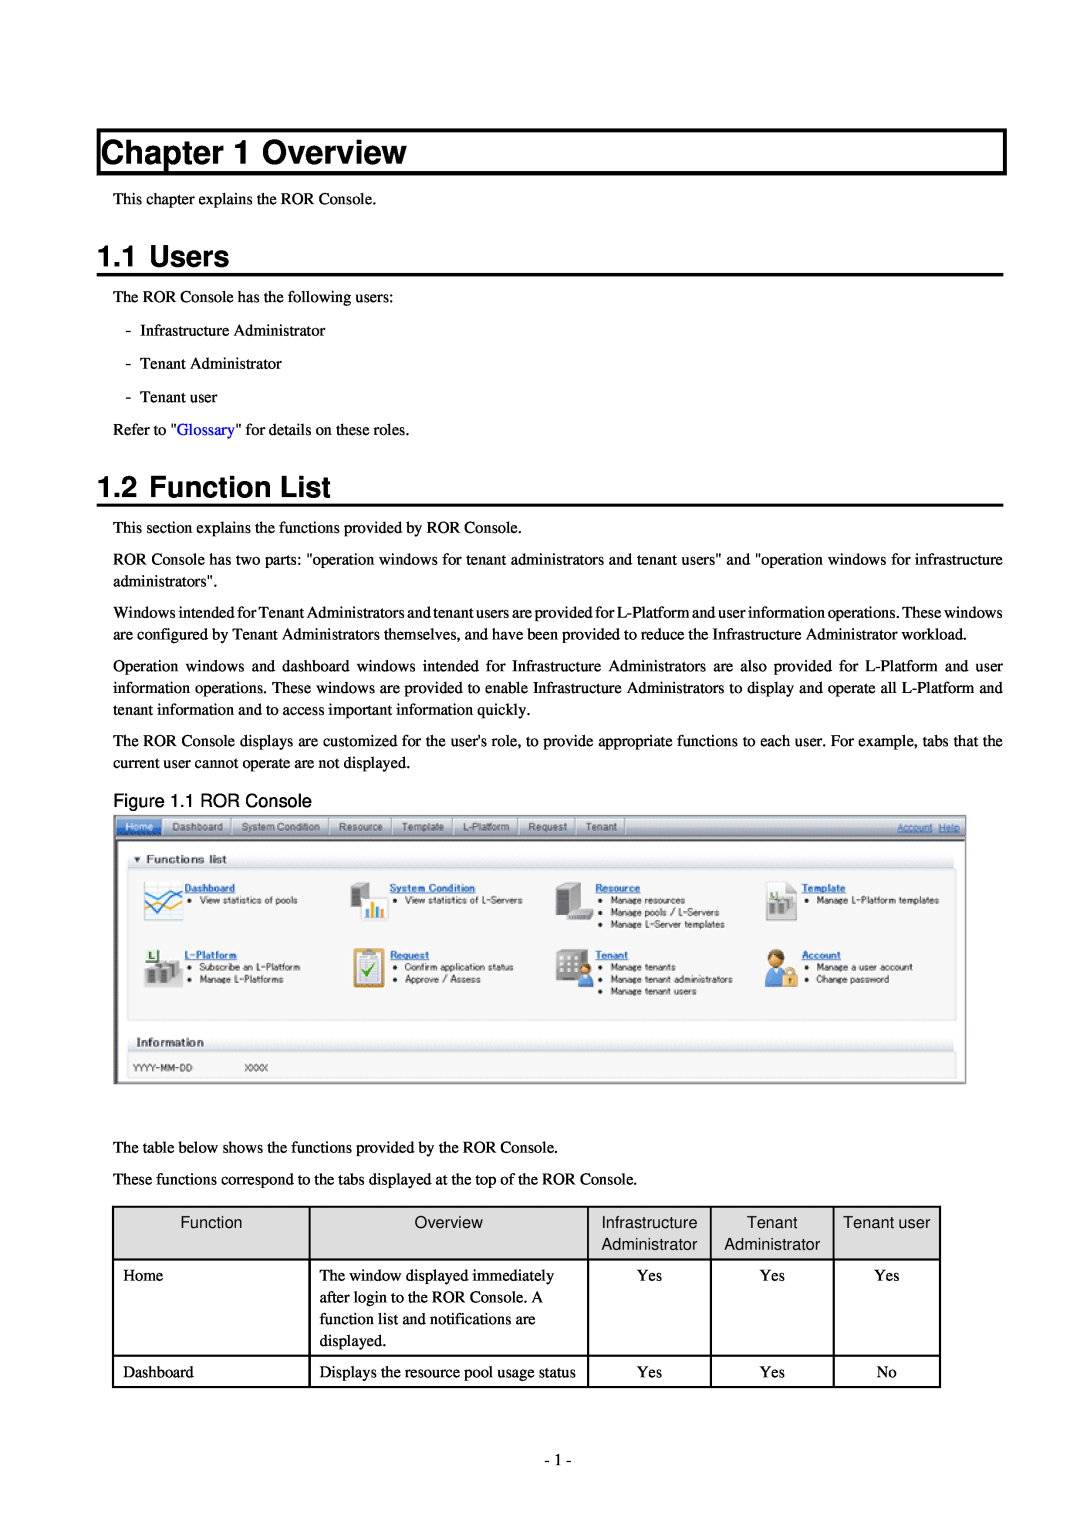 Fujitsu V3.0.0 manual Overview, Users, Function List, 1 ROR Console 